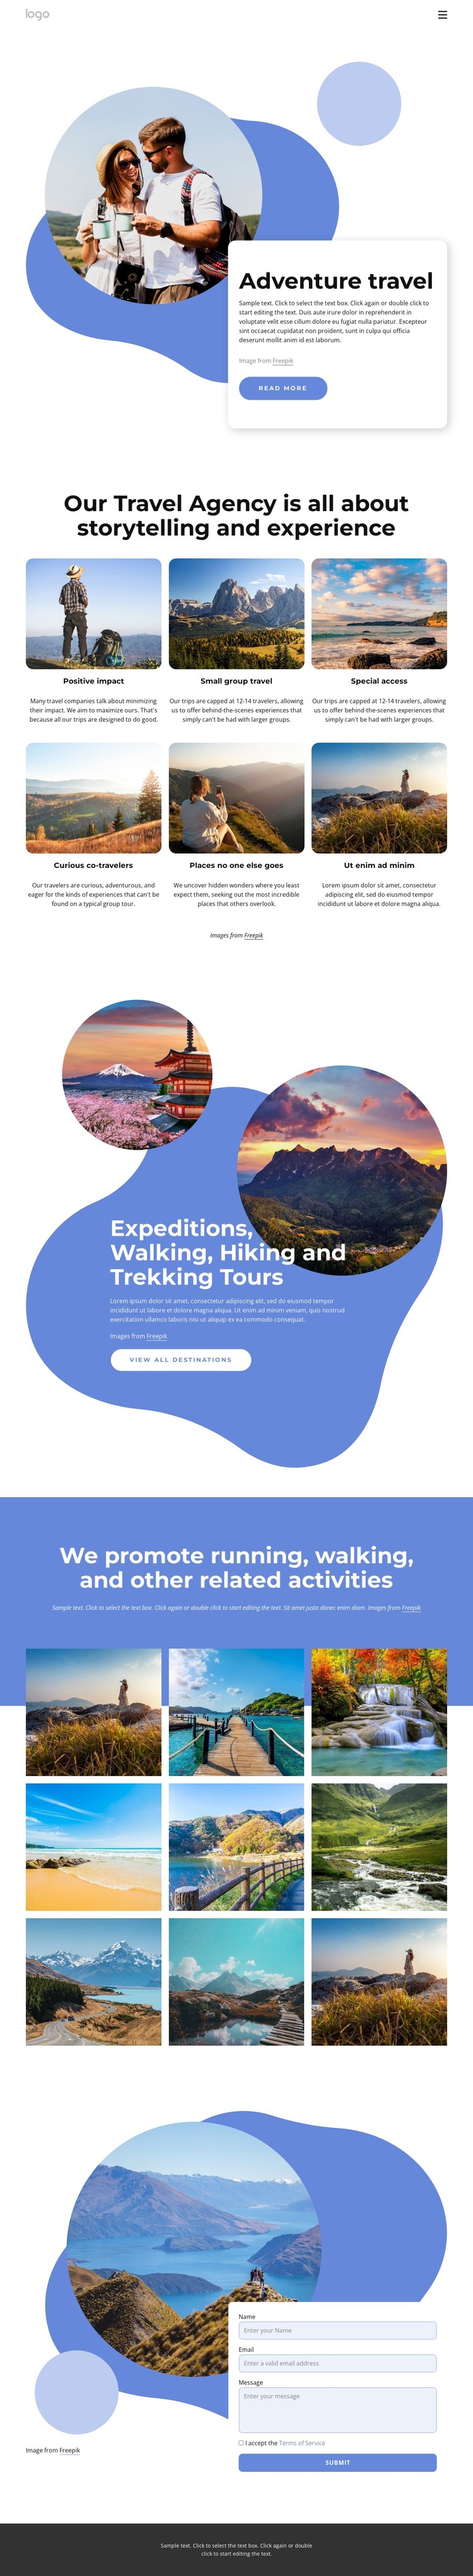 We are a full service travel agency Web Design